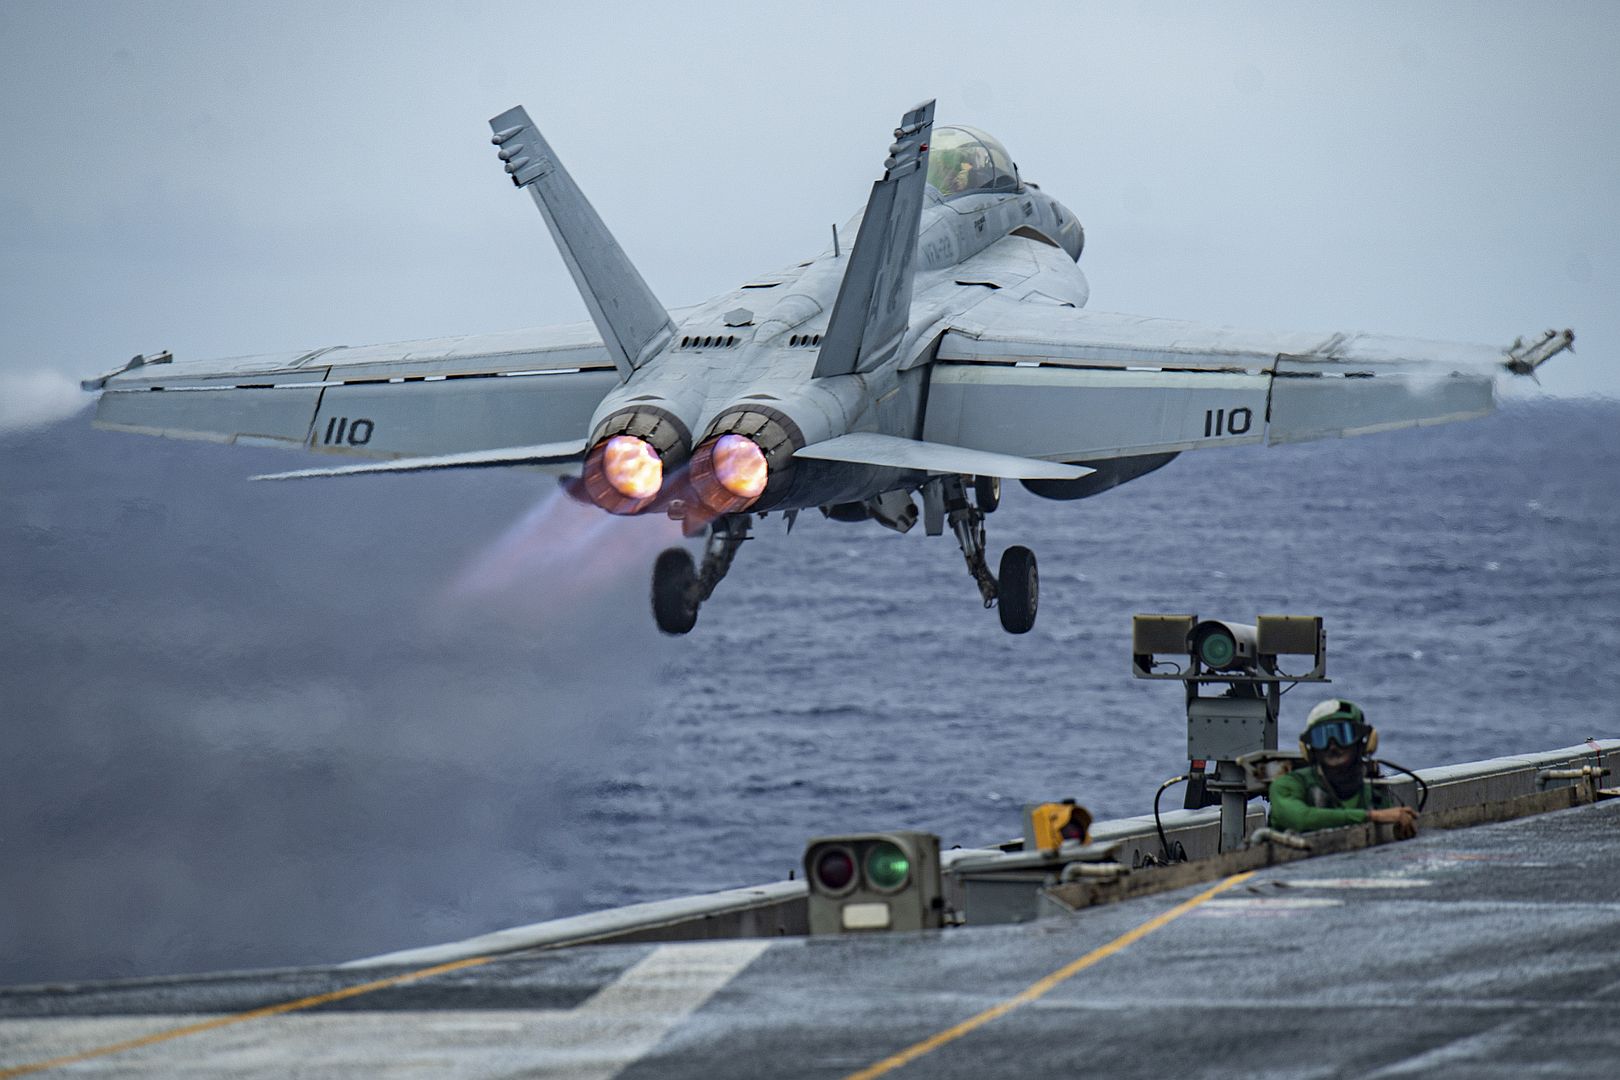  22 Launches From The Flight Deck Of The Aircraft Carrier USS Nimitz ToZ32BnJNgG1w1hKMzjZym